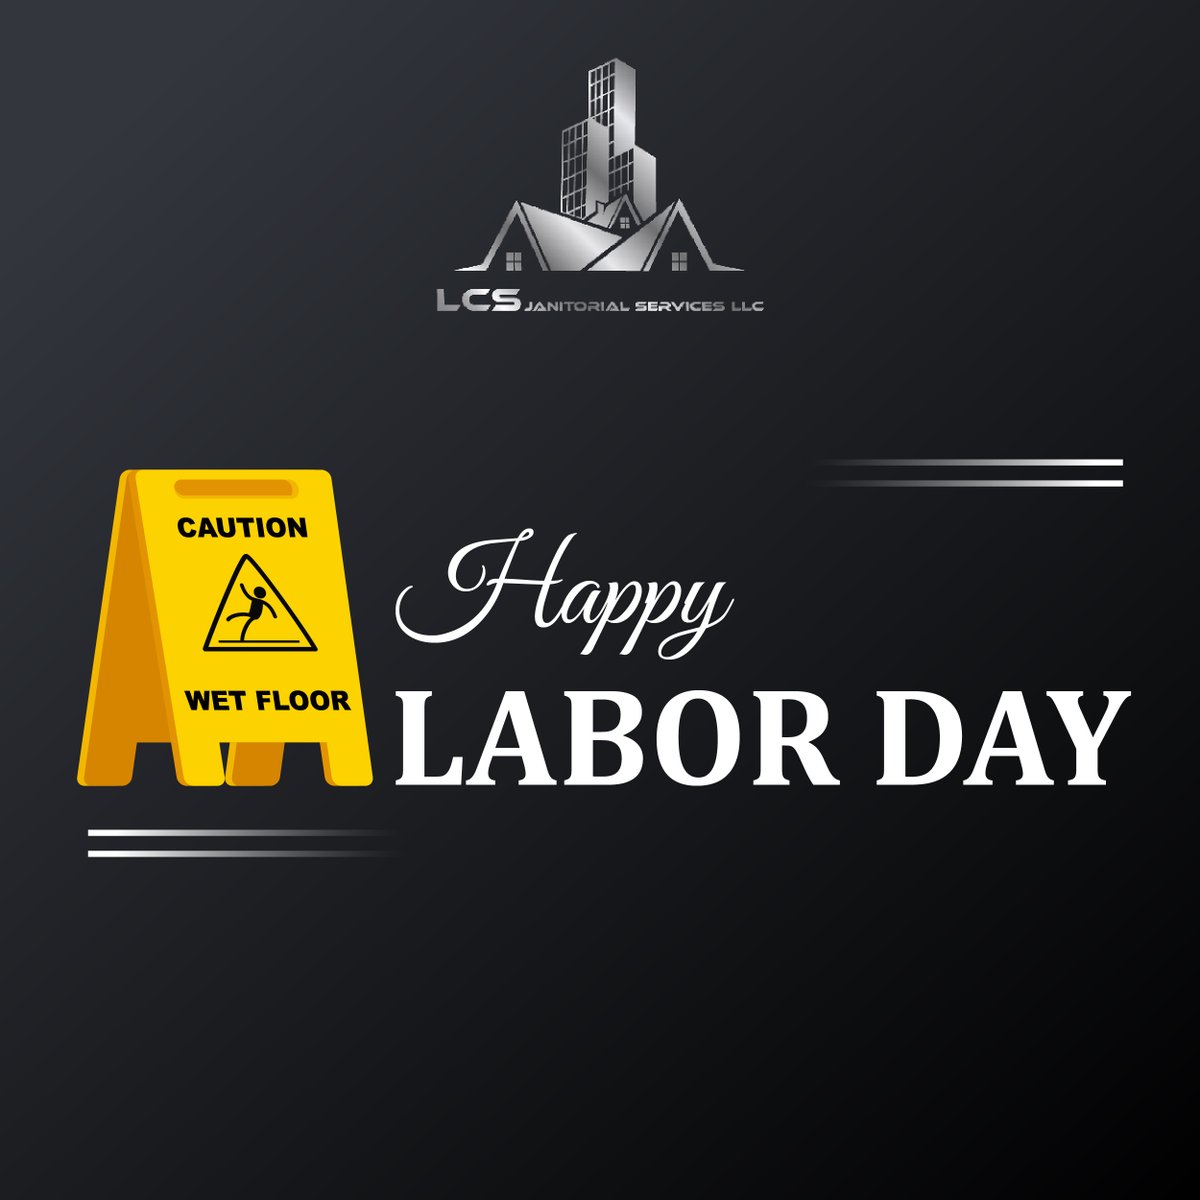 On this Labor Day, we salute the sweat, the dedication, and the hard work that fuel progress. Cheers to the driving force behind our achievements!

#LaborDay #CelebrateHardWork #HonoringLabor #laborday2023 #CelebratingProgress #lcsjanitorialservices